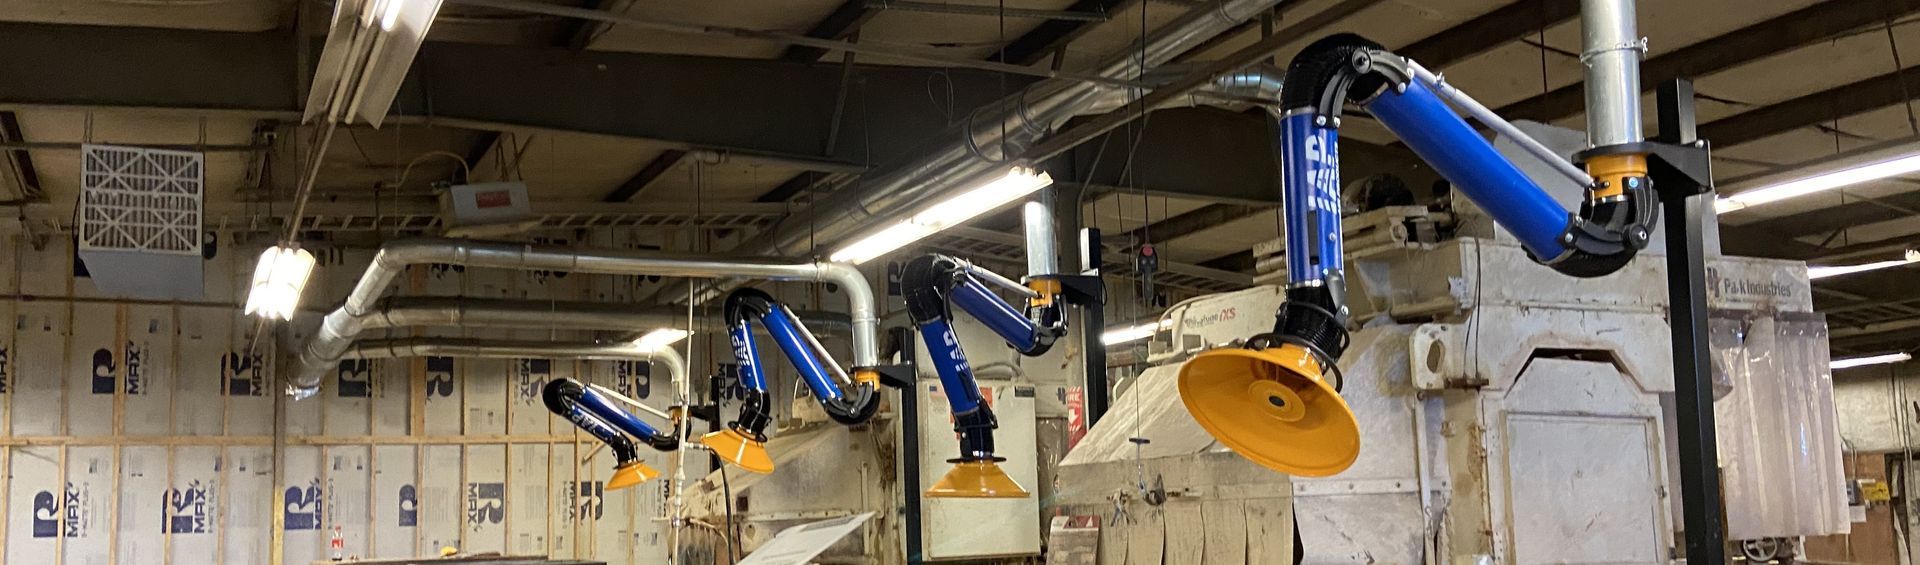 Welding Fume extraction arms by IAP for workplace safety and environmental protection